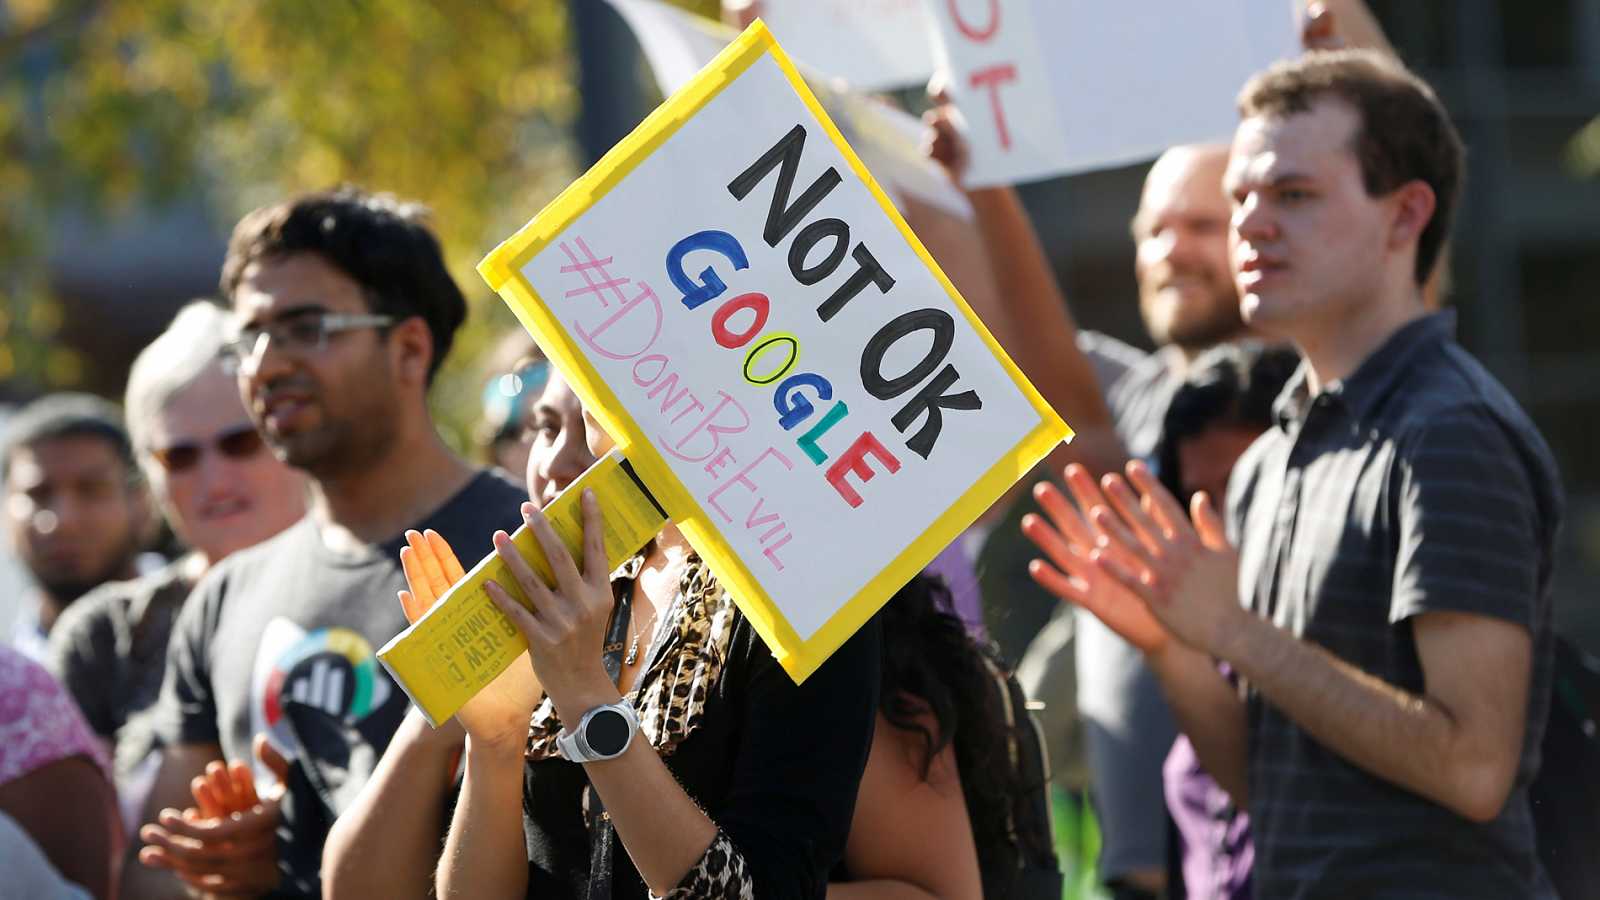 Google is making changes following last week's sexual harassment walkout